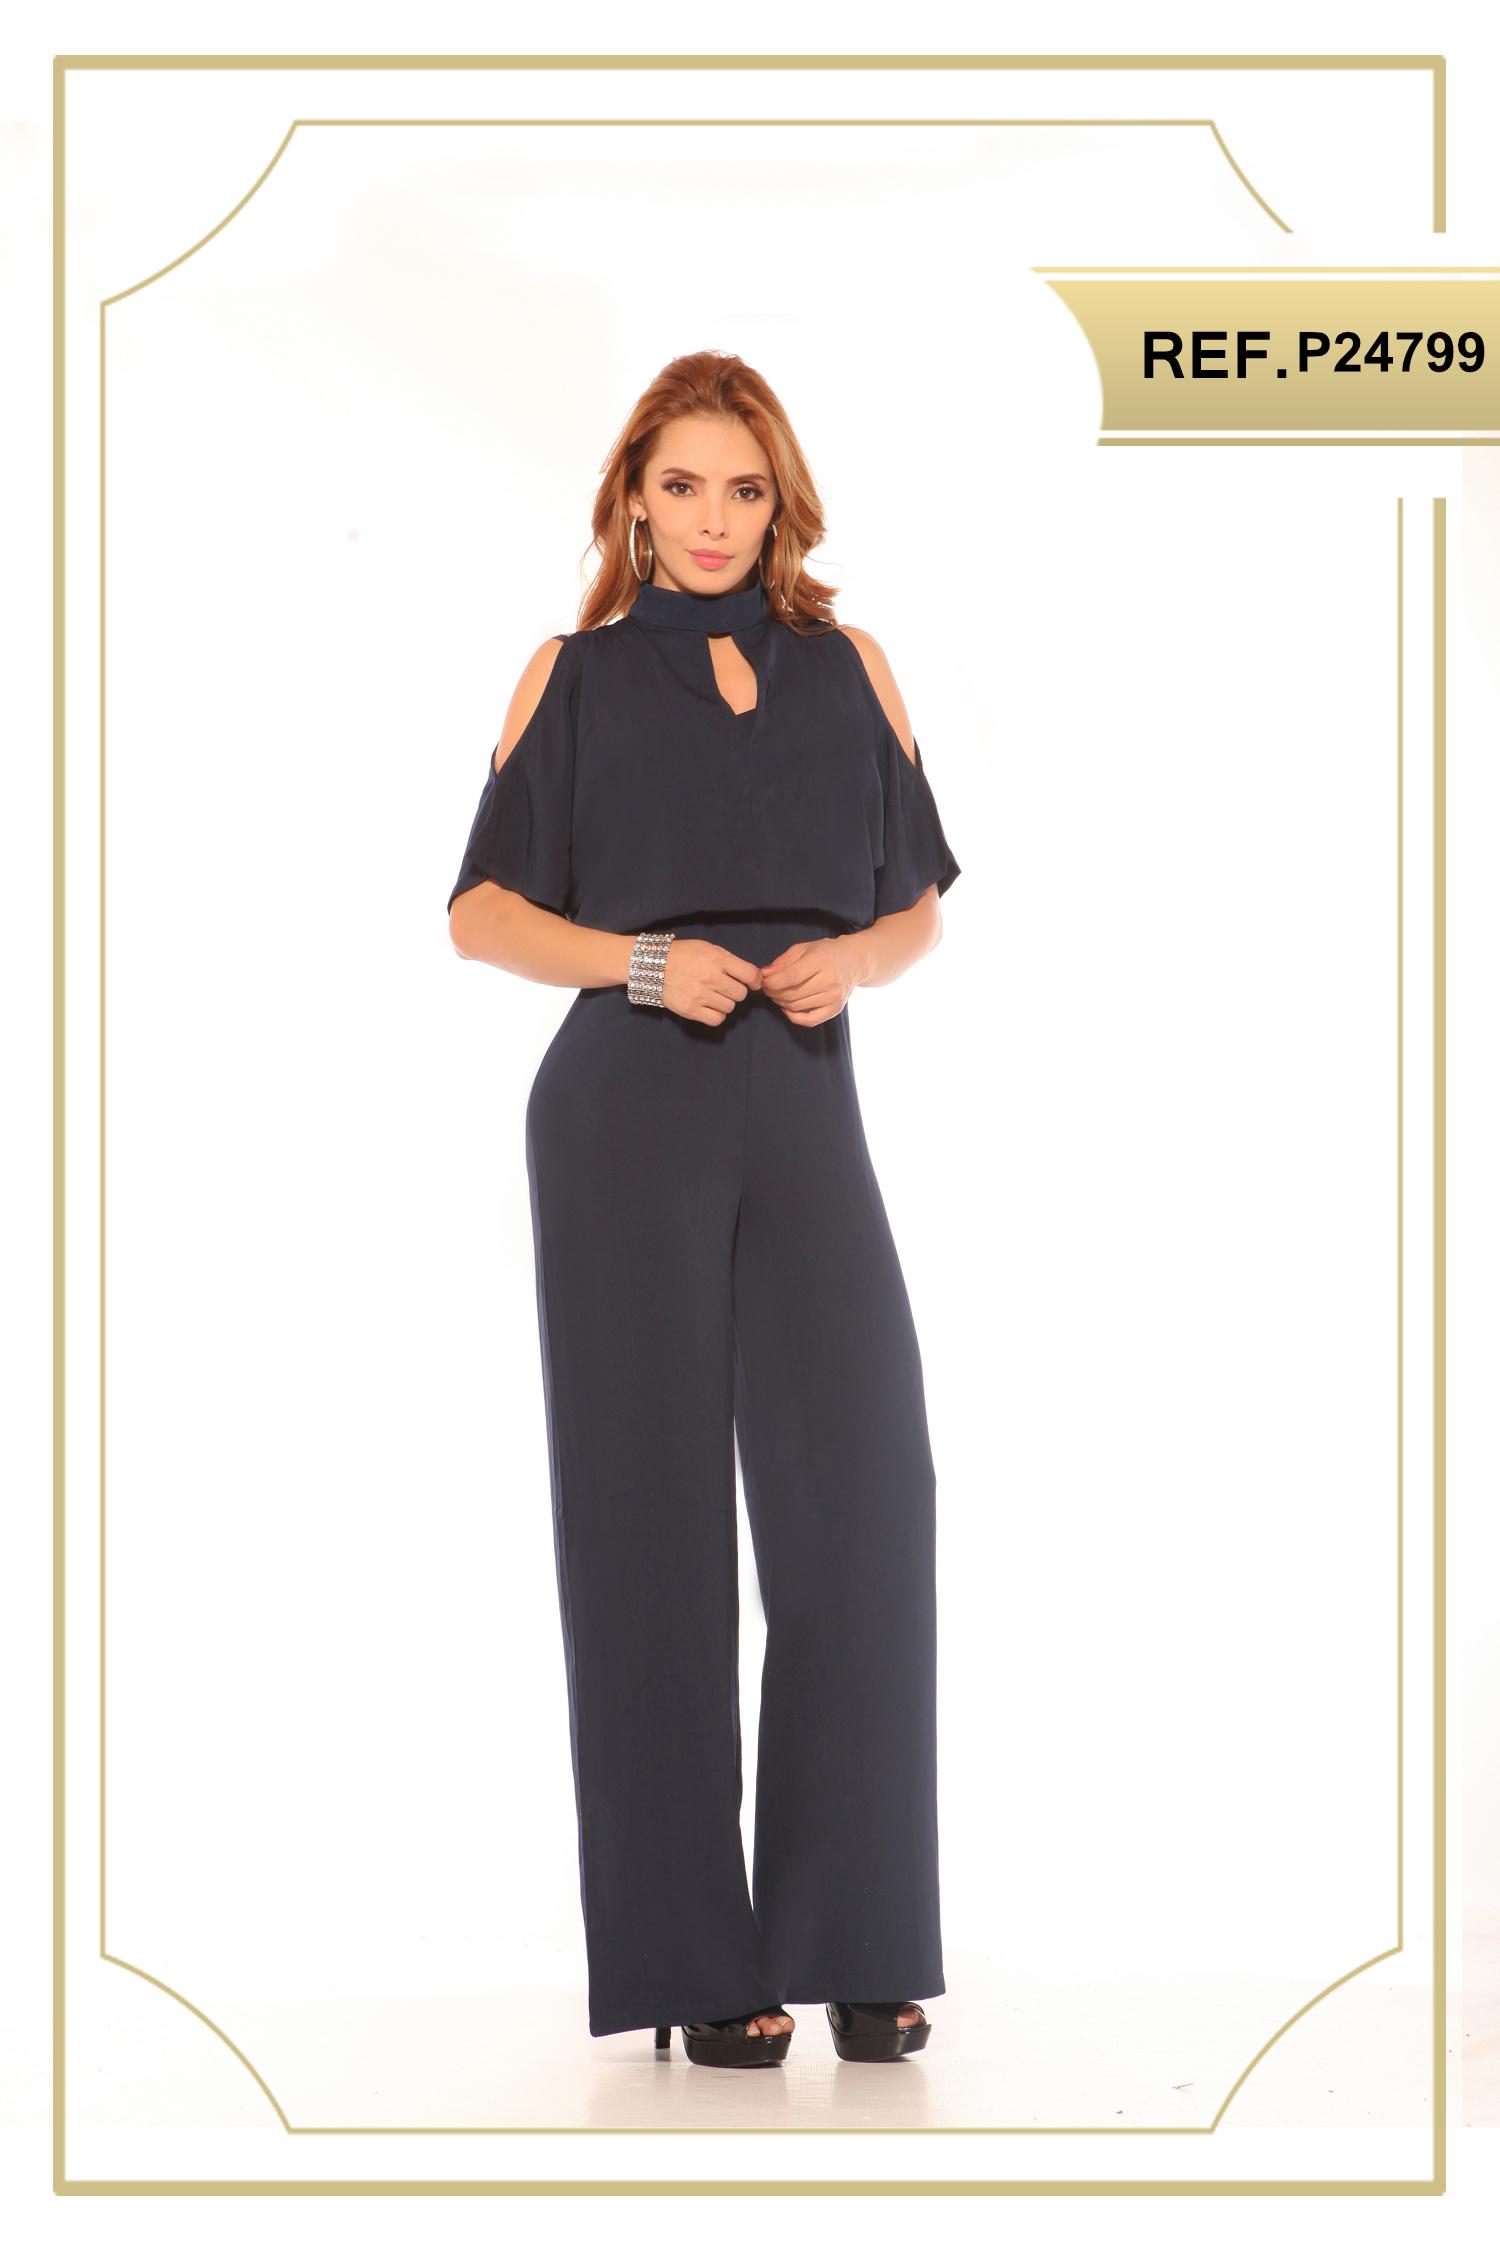 Fashion full bodysuit with bare shoulders and sleeves, wide pants and tight to the body. Shape your Figure and Look Fantastic